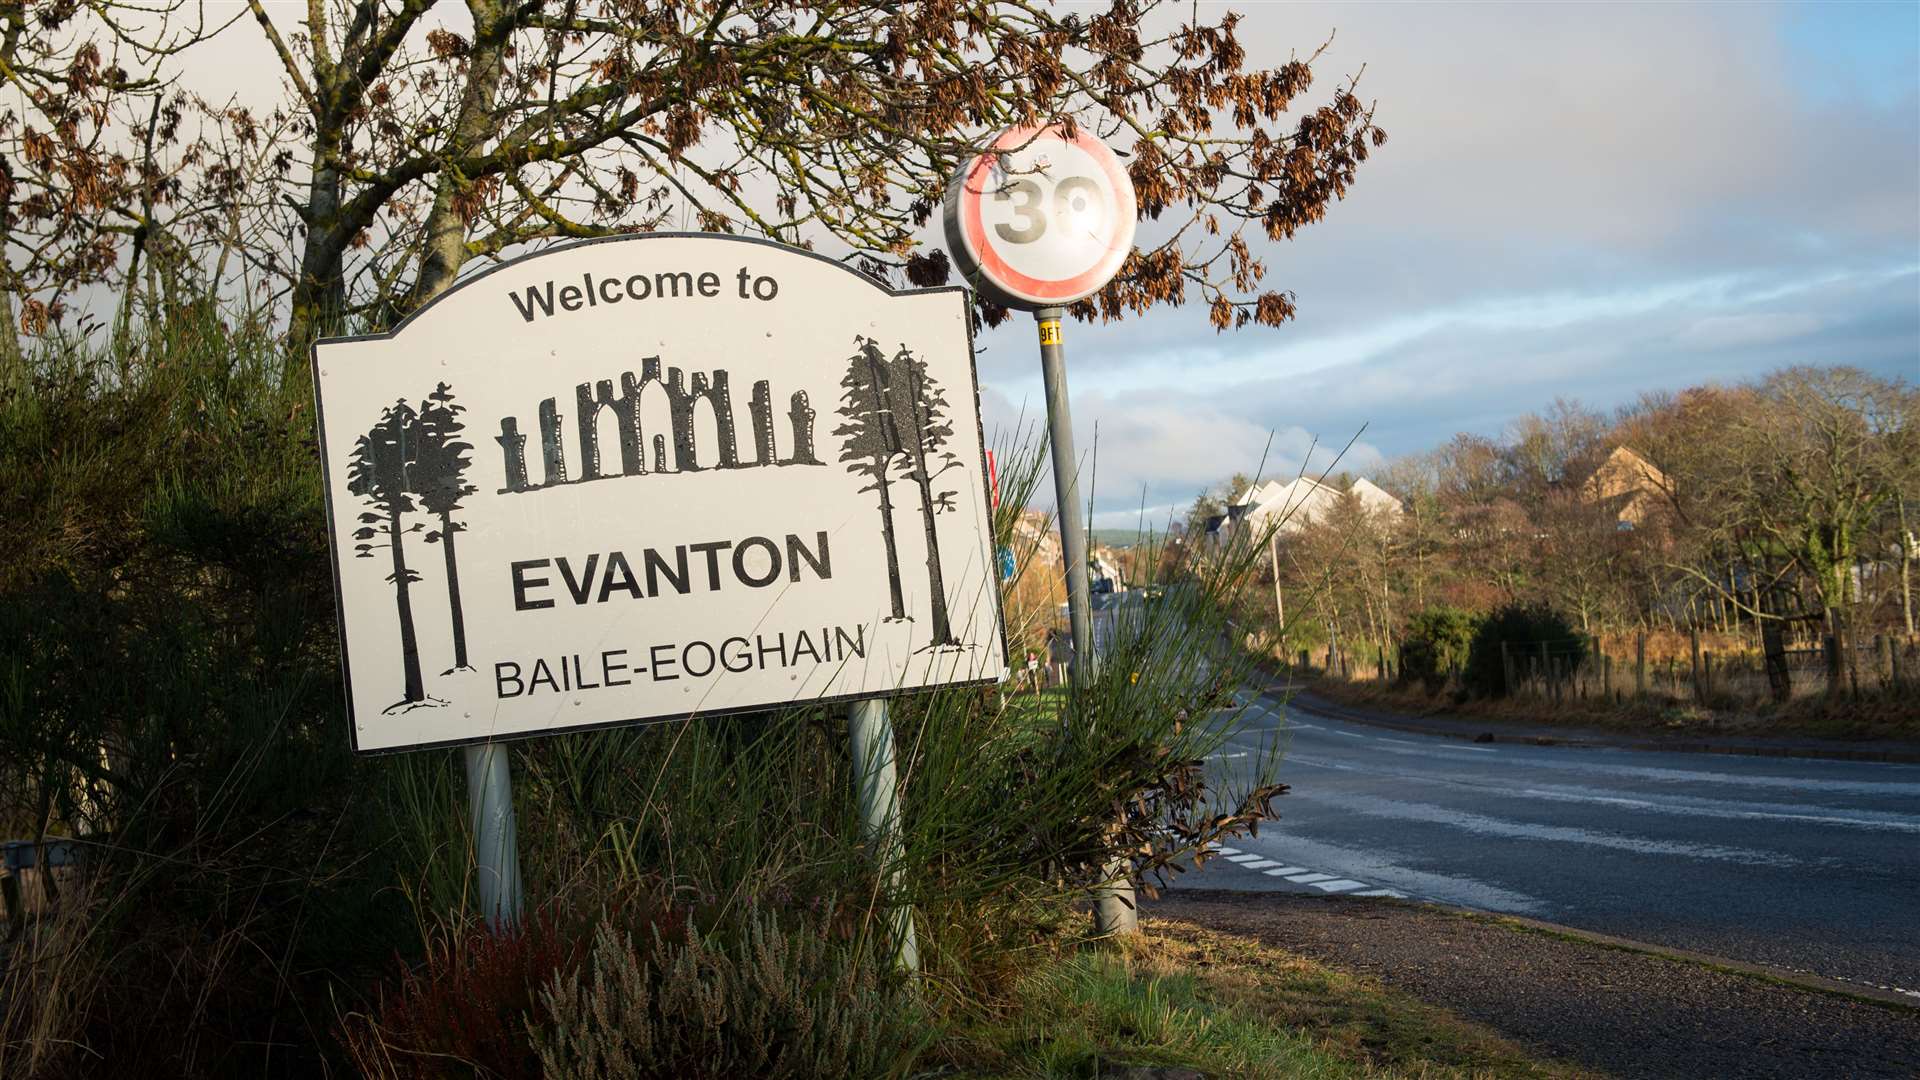 Evanton is poised for expansion.